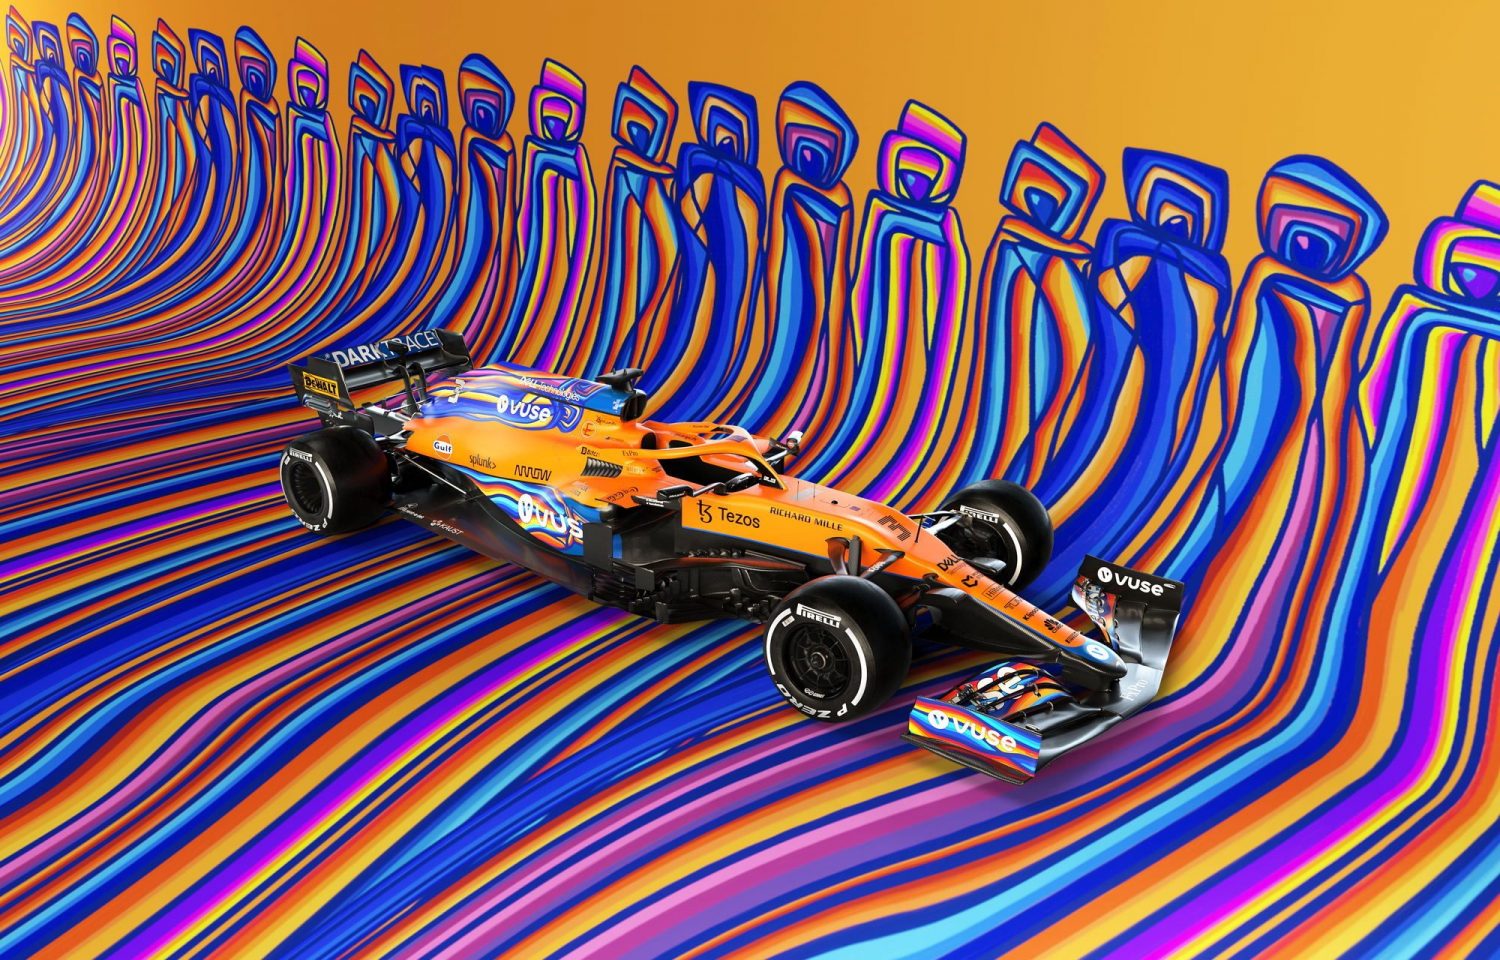 McLaren to roll out revised livery for Abu Dhabi finale